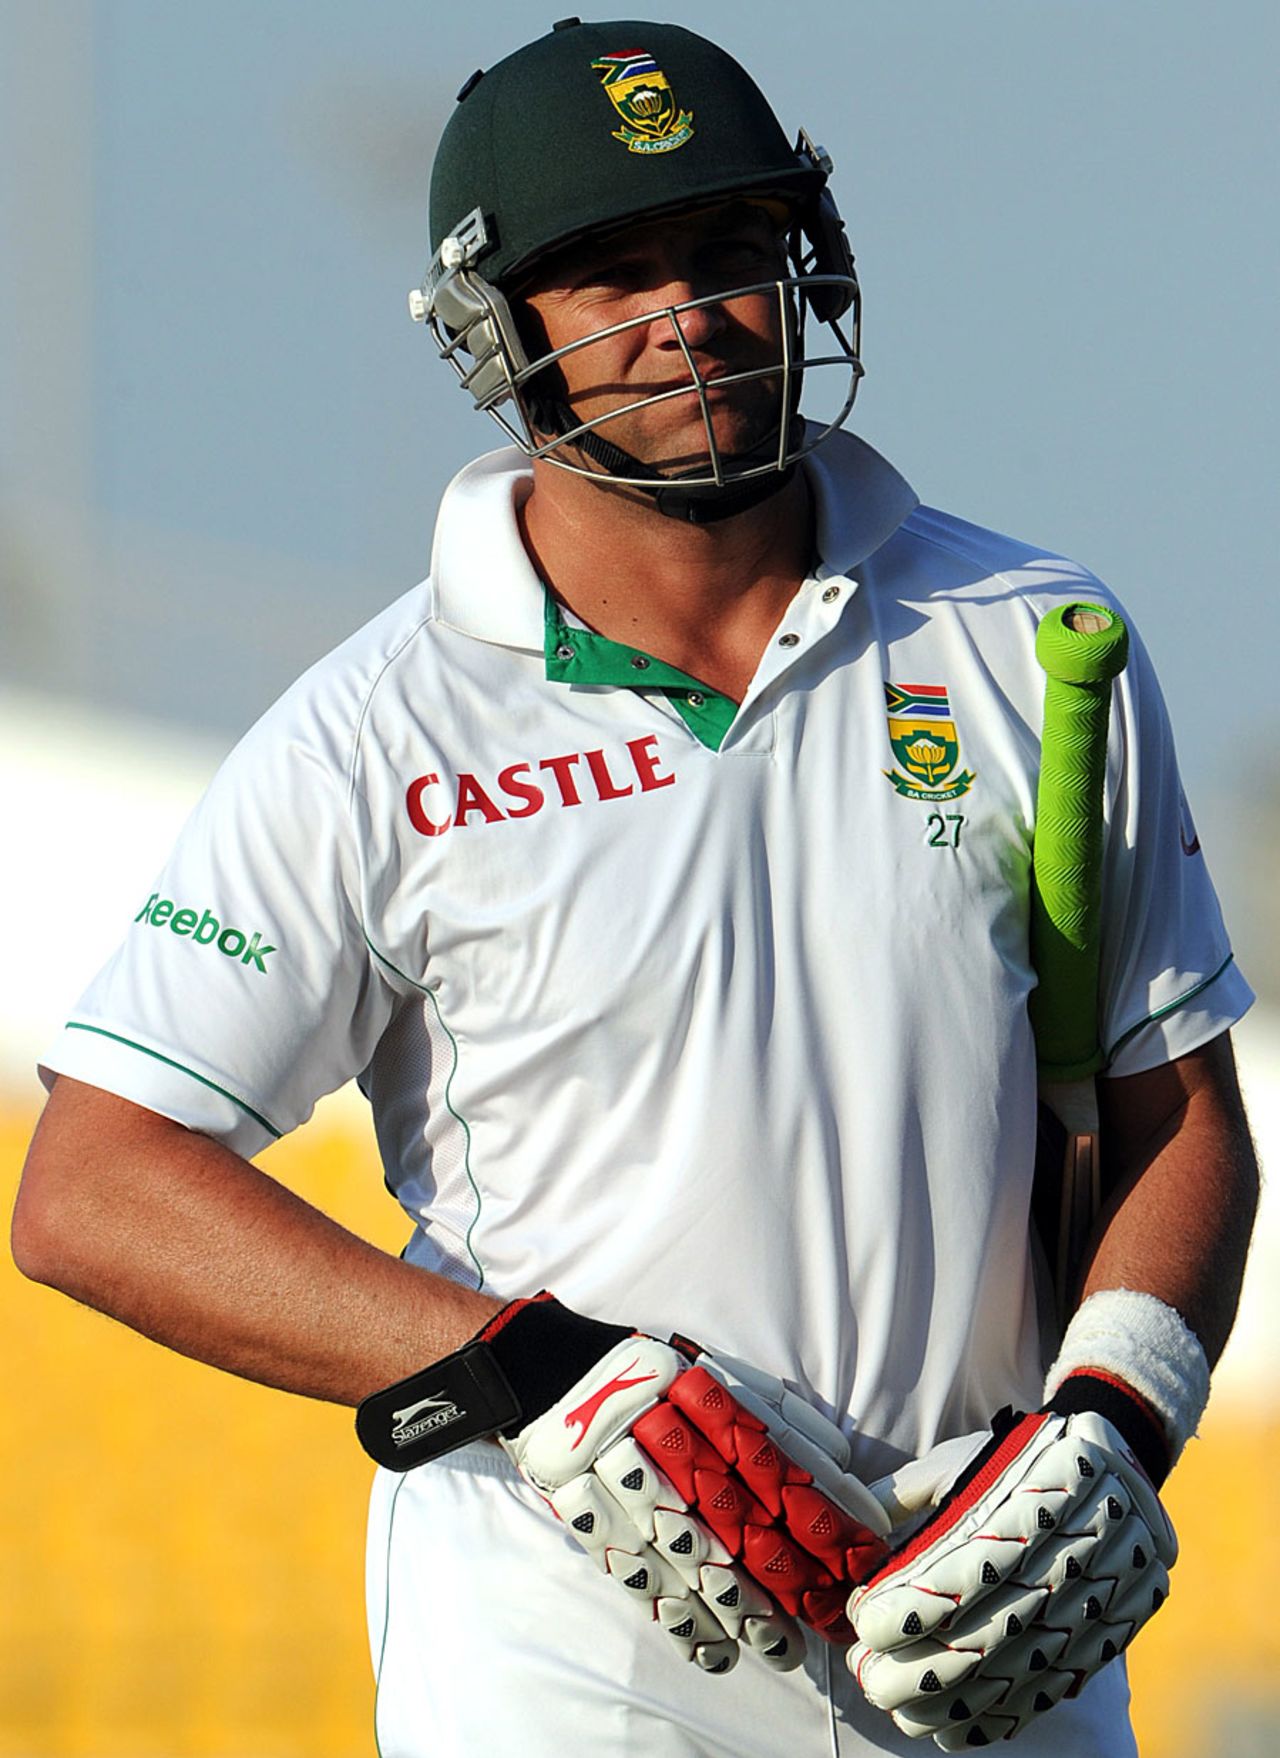 Jacques Kallis walks off after getting out to Mohammad Hafeez, Pakistan v South Africa, 2nd Test, Abu Dhabi, 4th day, November 23, 2010